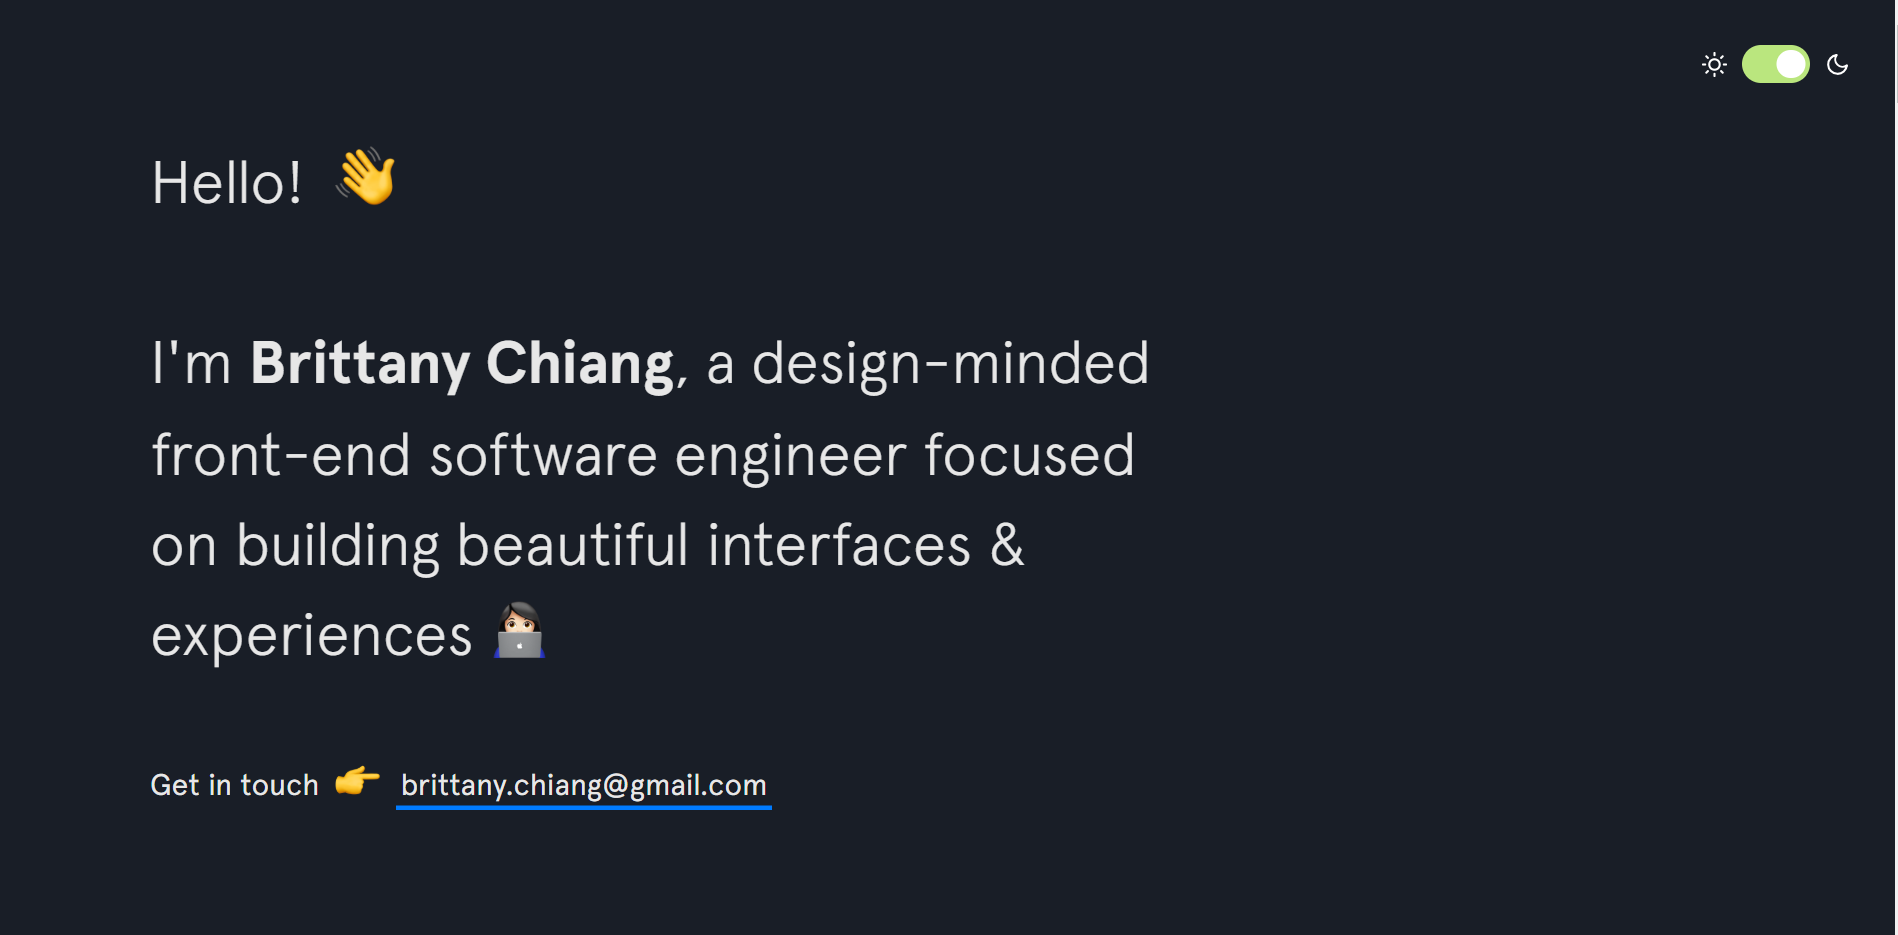 Brittany Chiang's UX Engineer porfolio